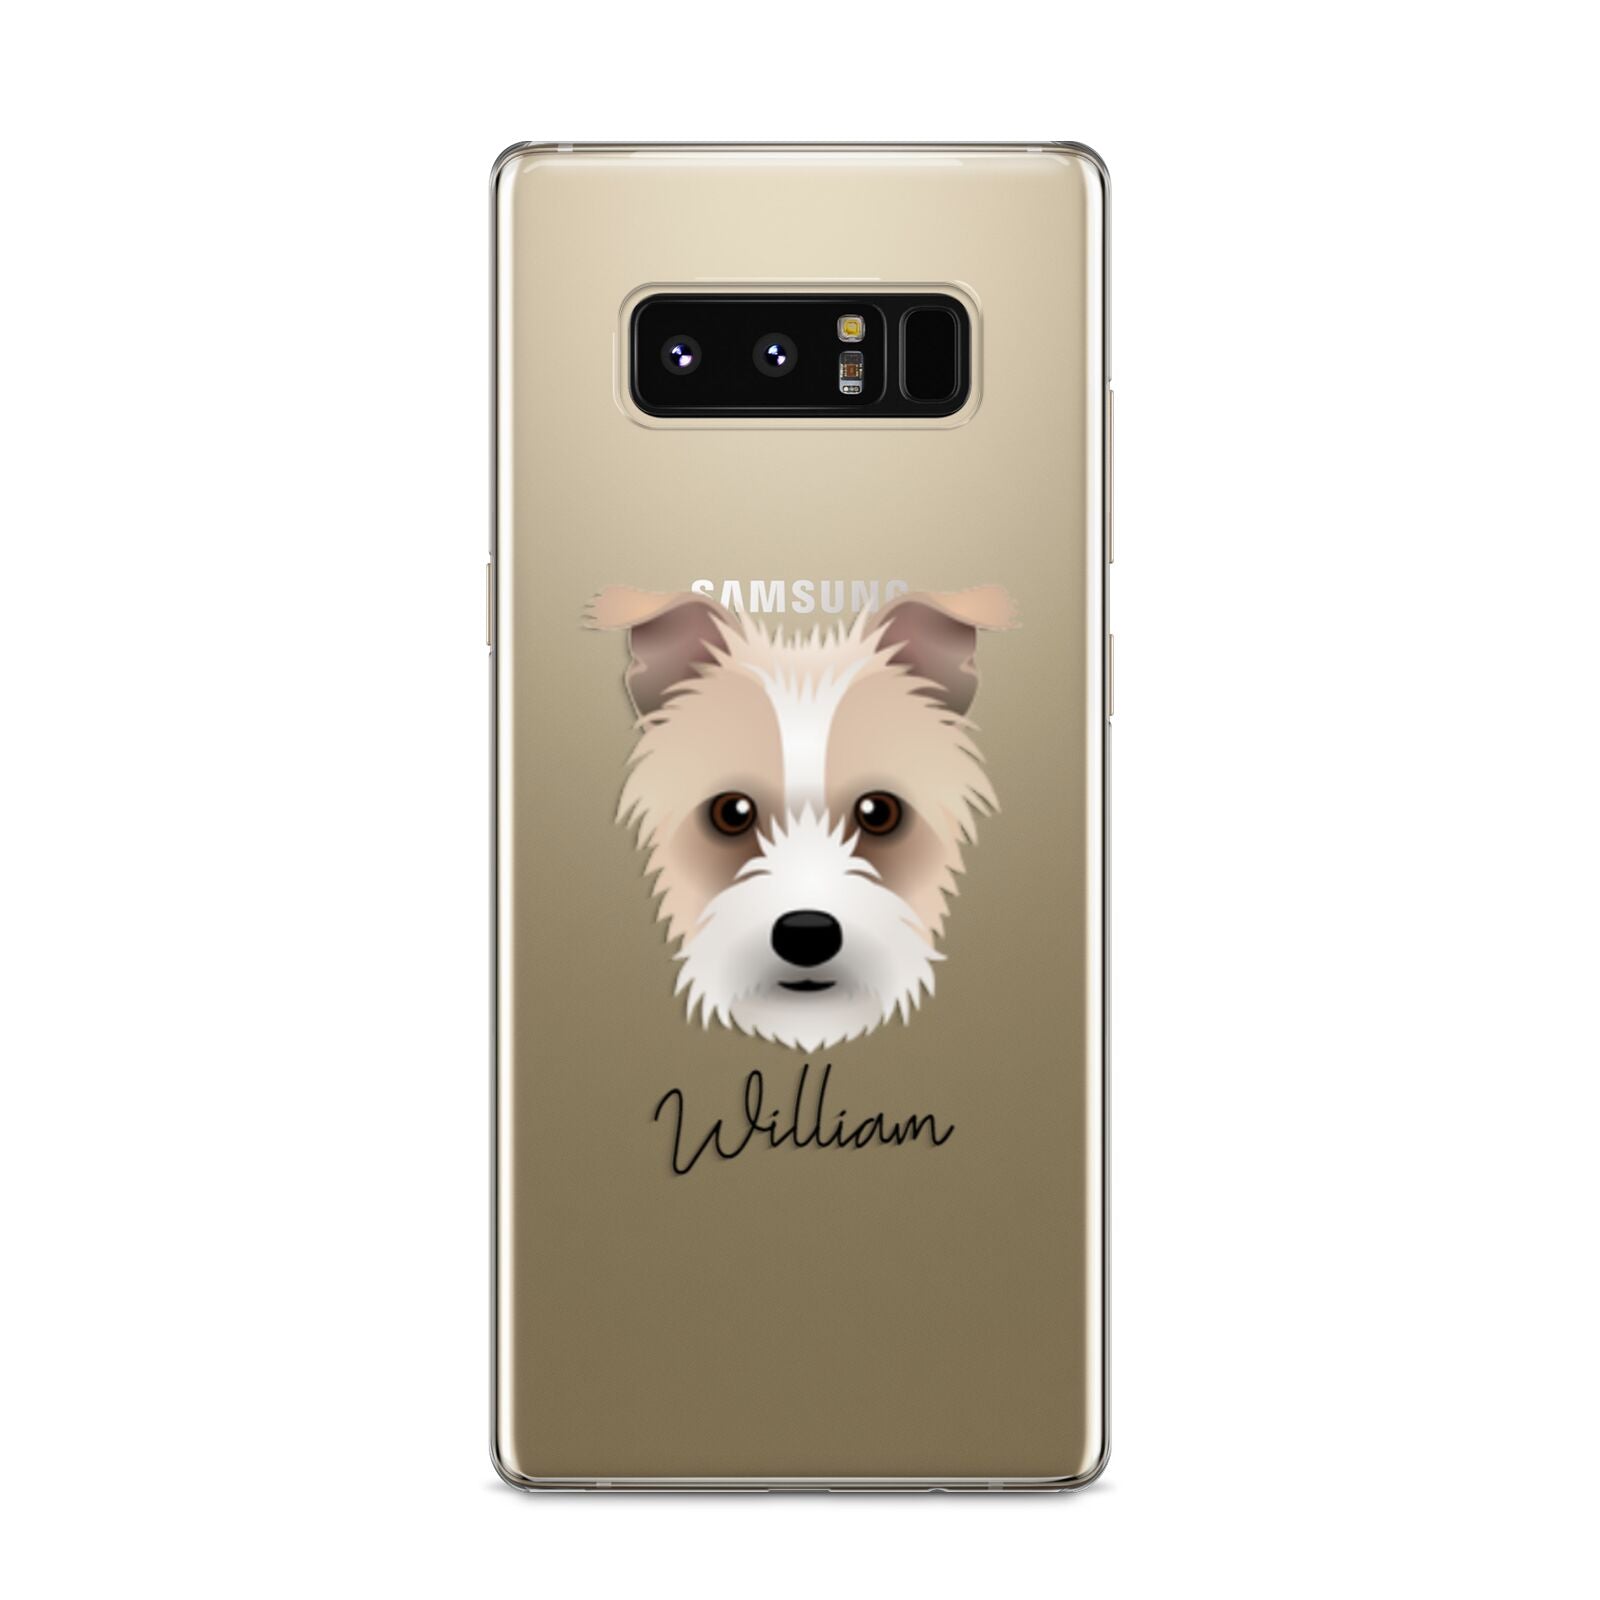 Sporting Lucas Terrier Personalised Samsung Galaxy S8 Case